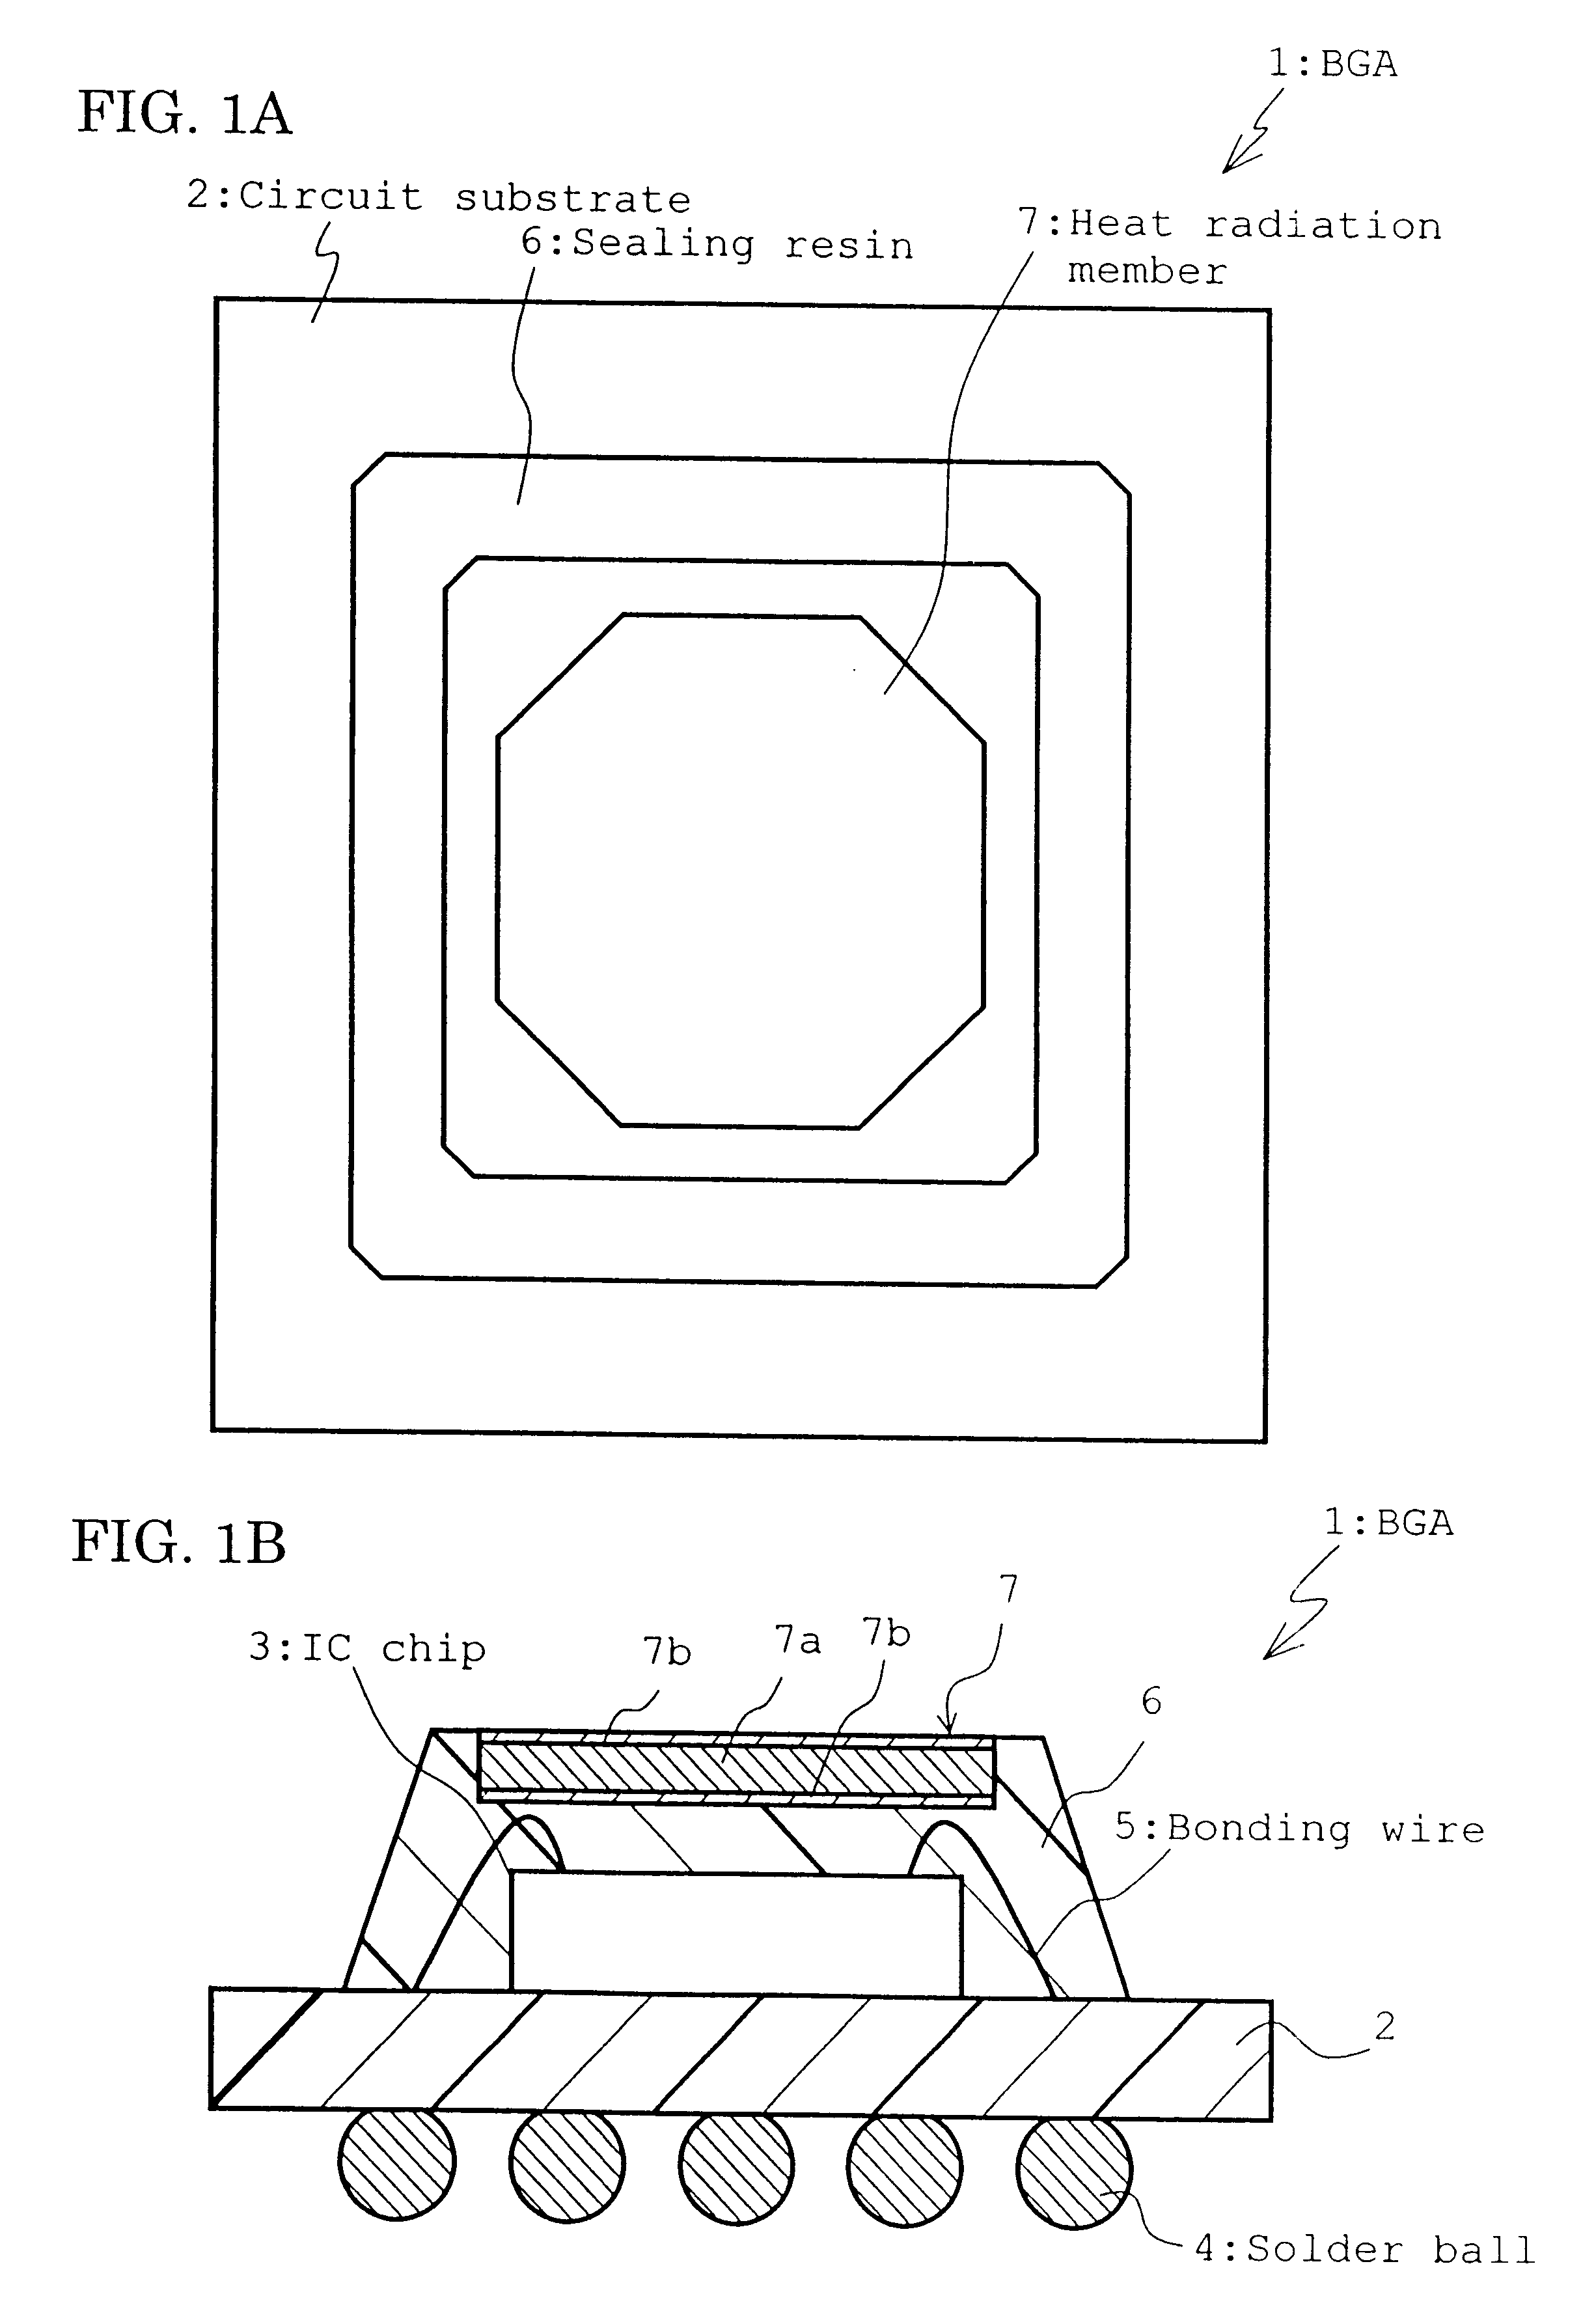 Resin sealed semiconductor device utilizing a clad material heat sink